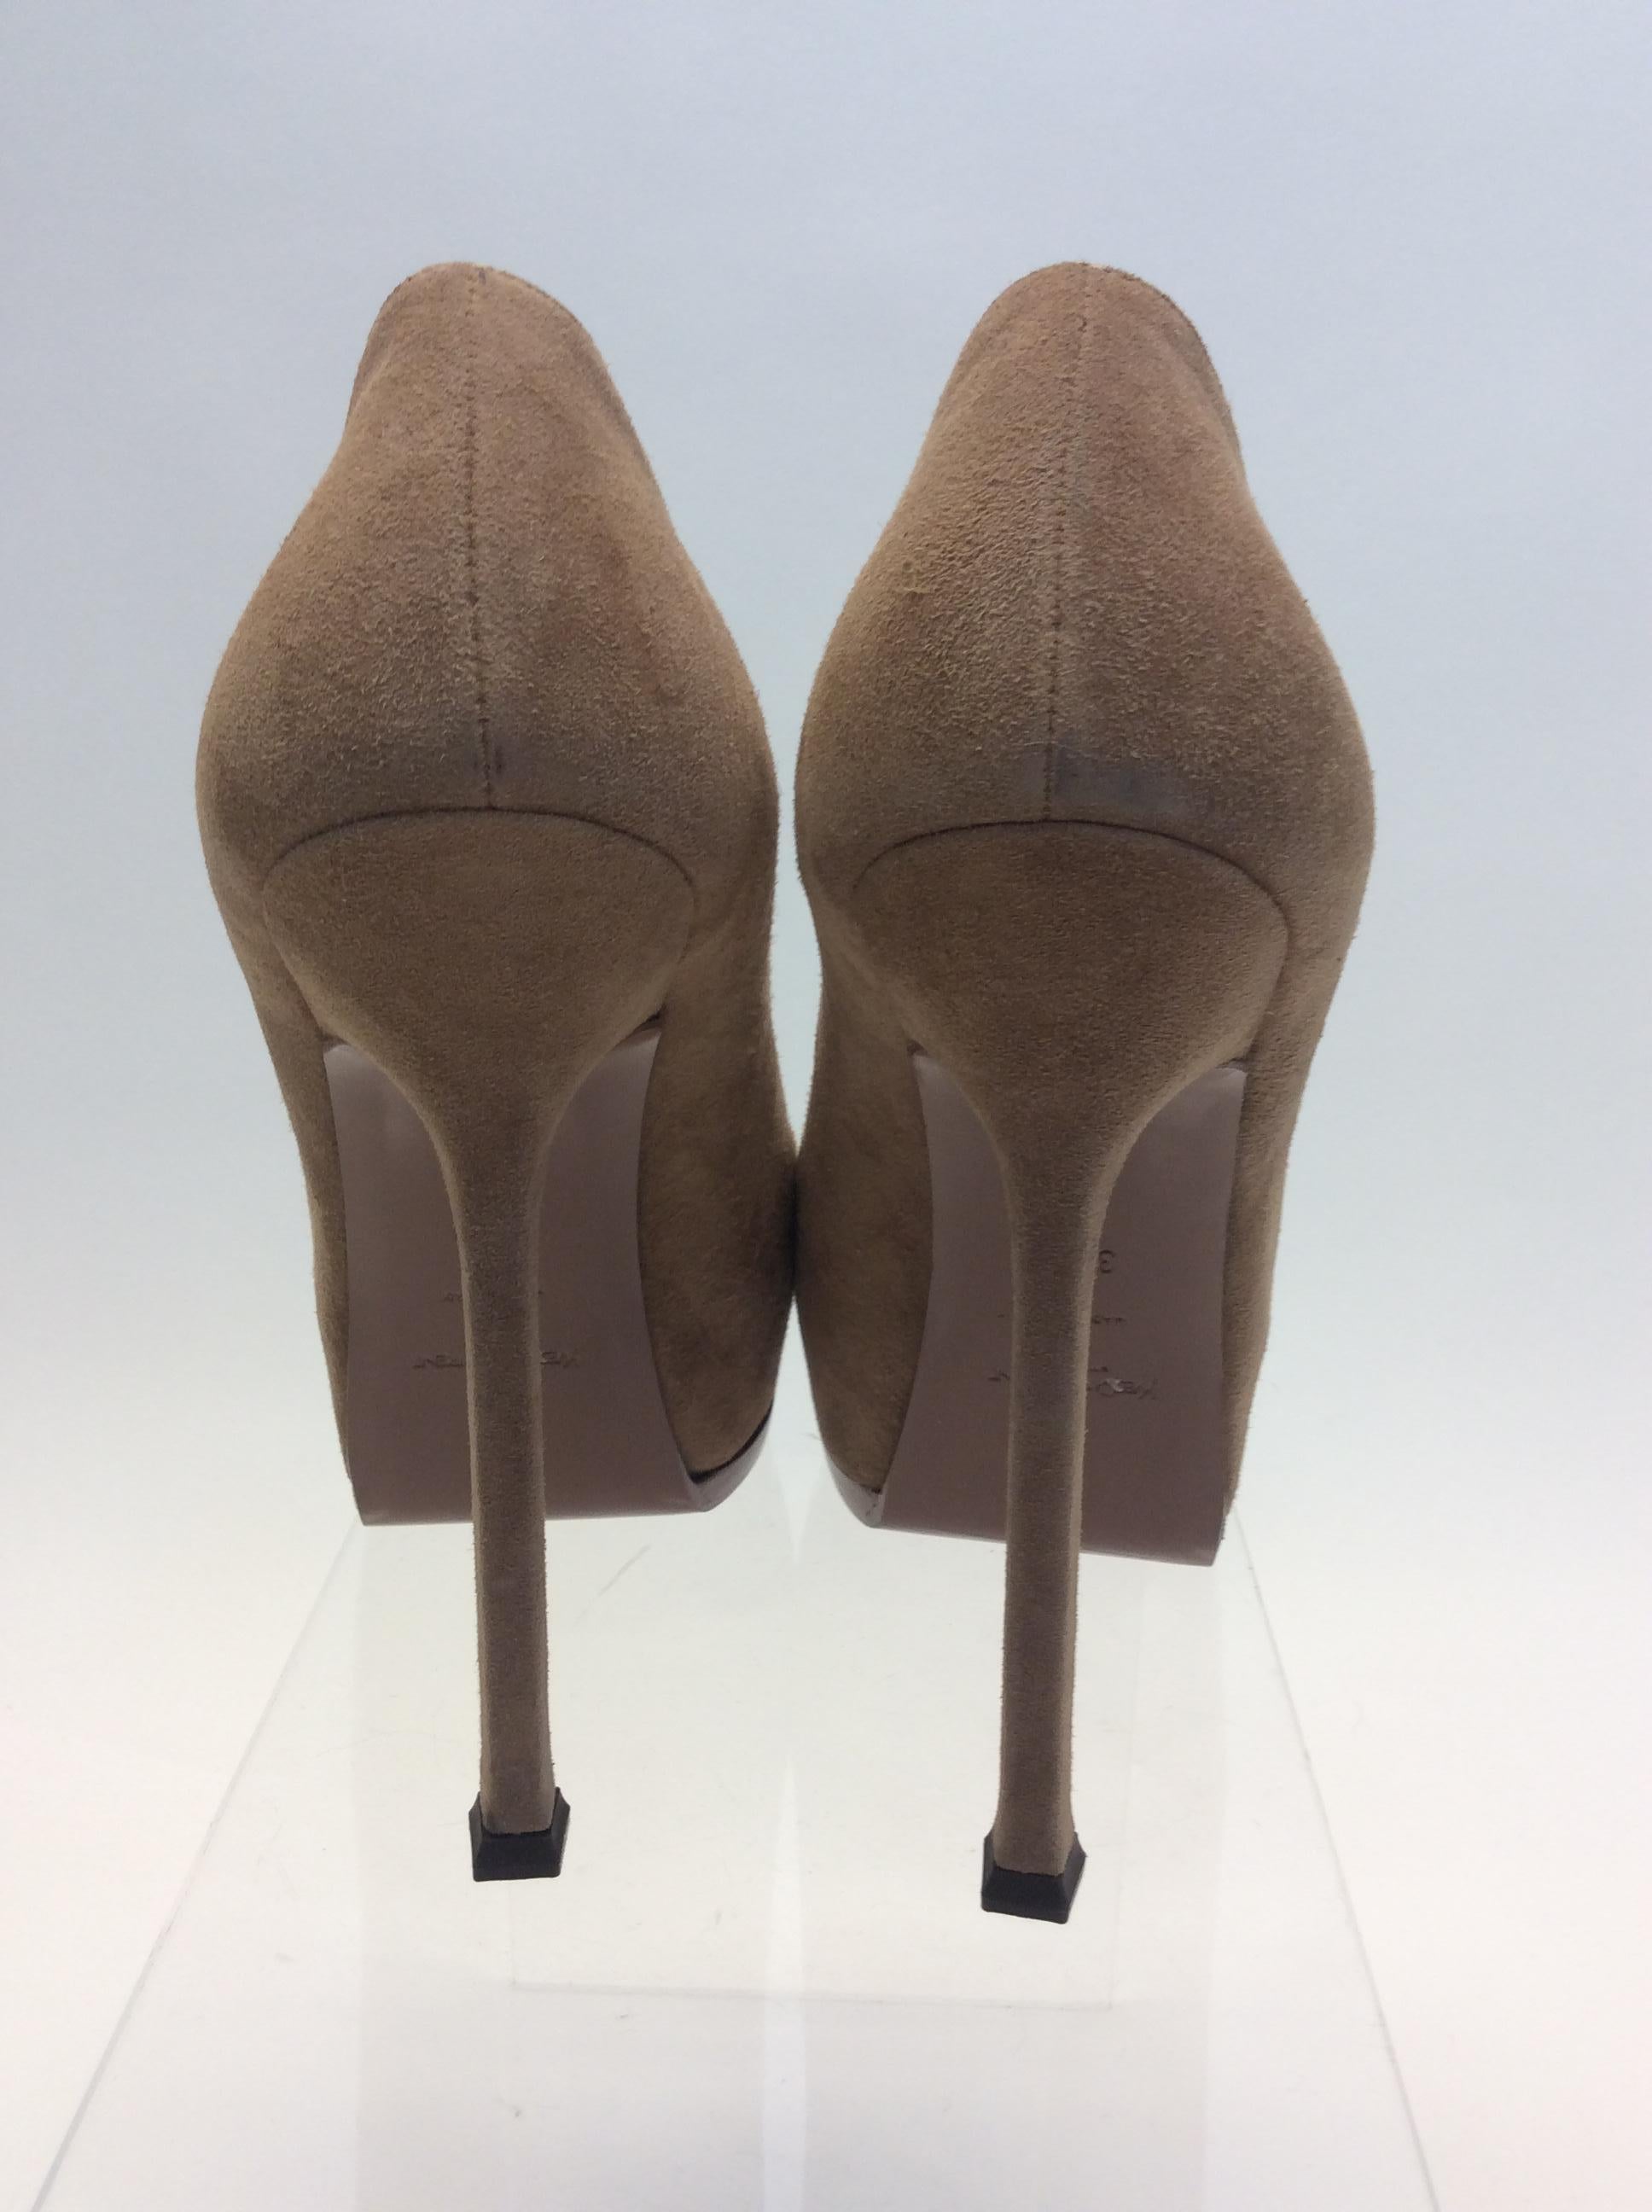 Yves Saint Laurent Nude Suede and Patent Leather Heels  In New Condition For Sale In Narberth, PA